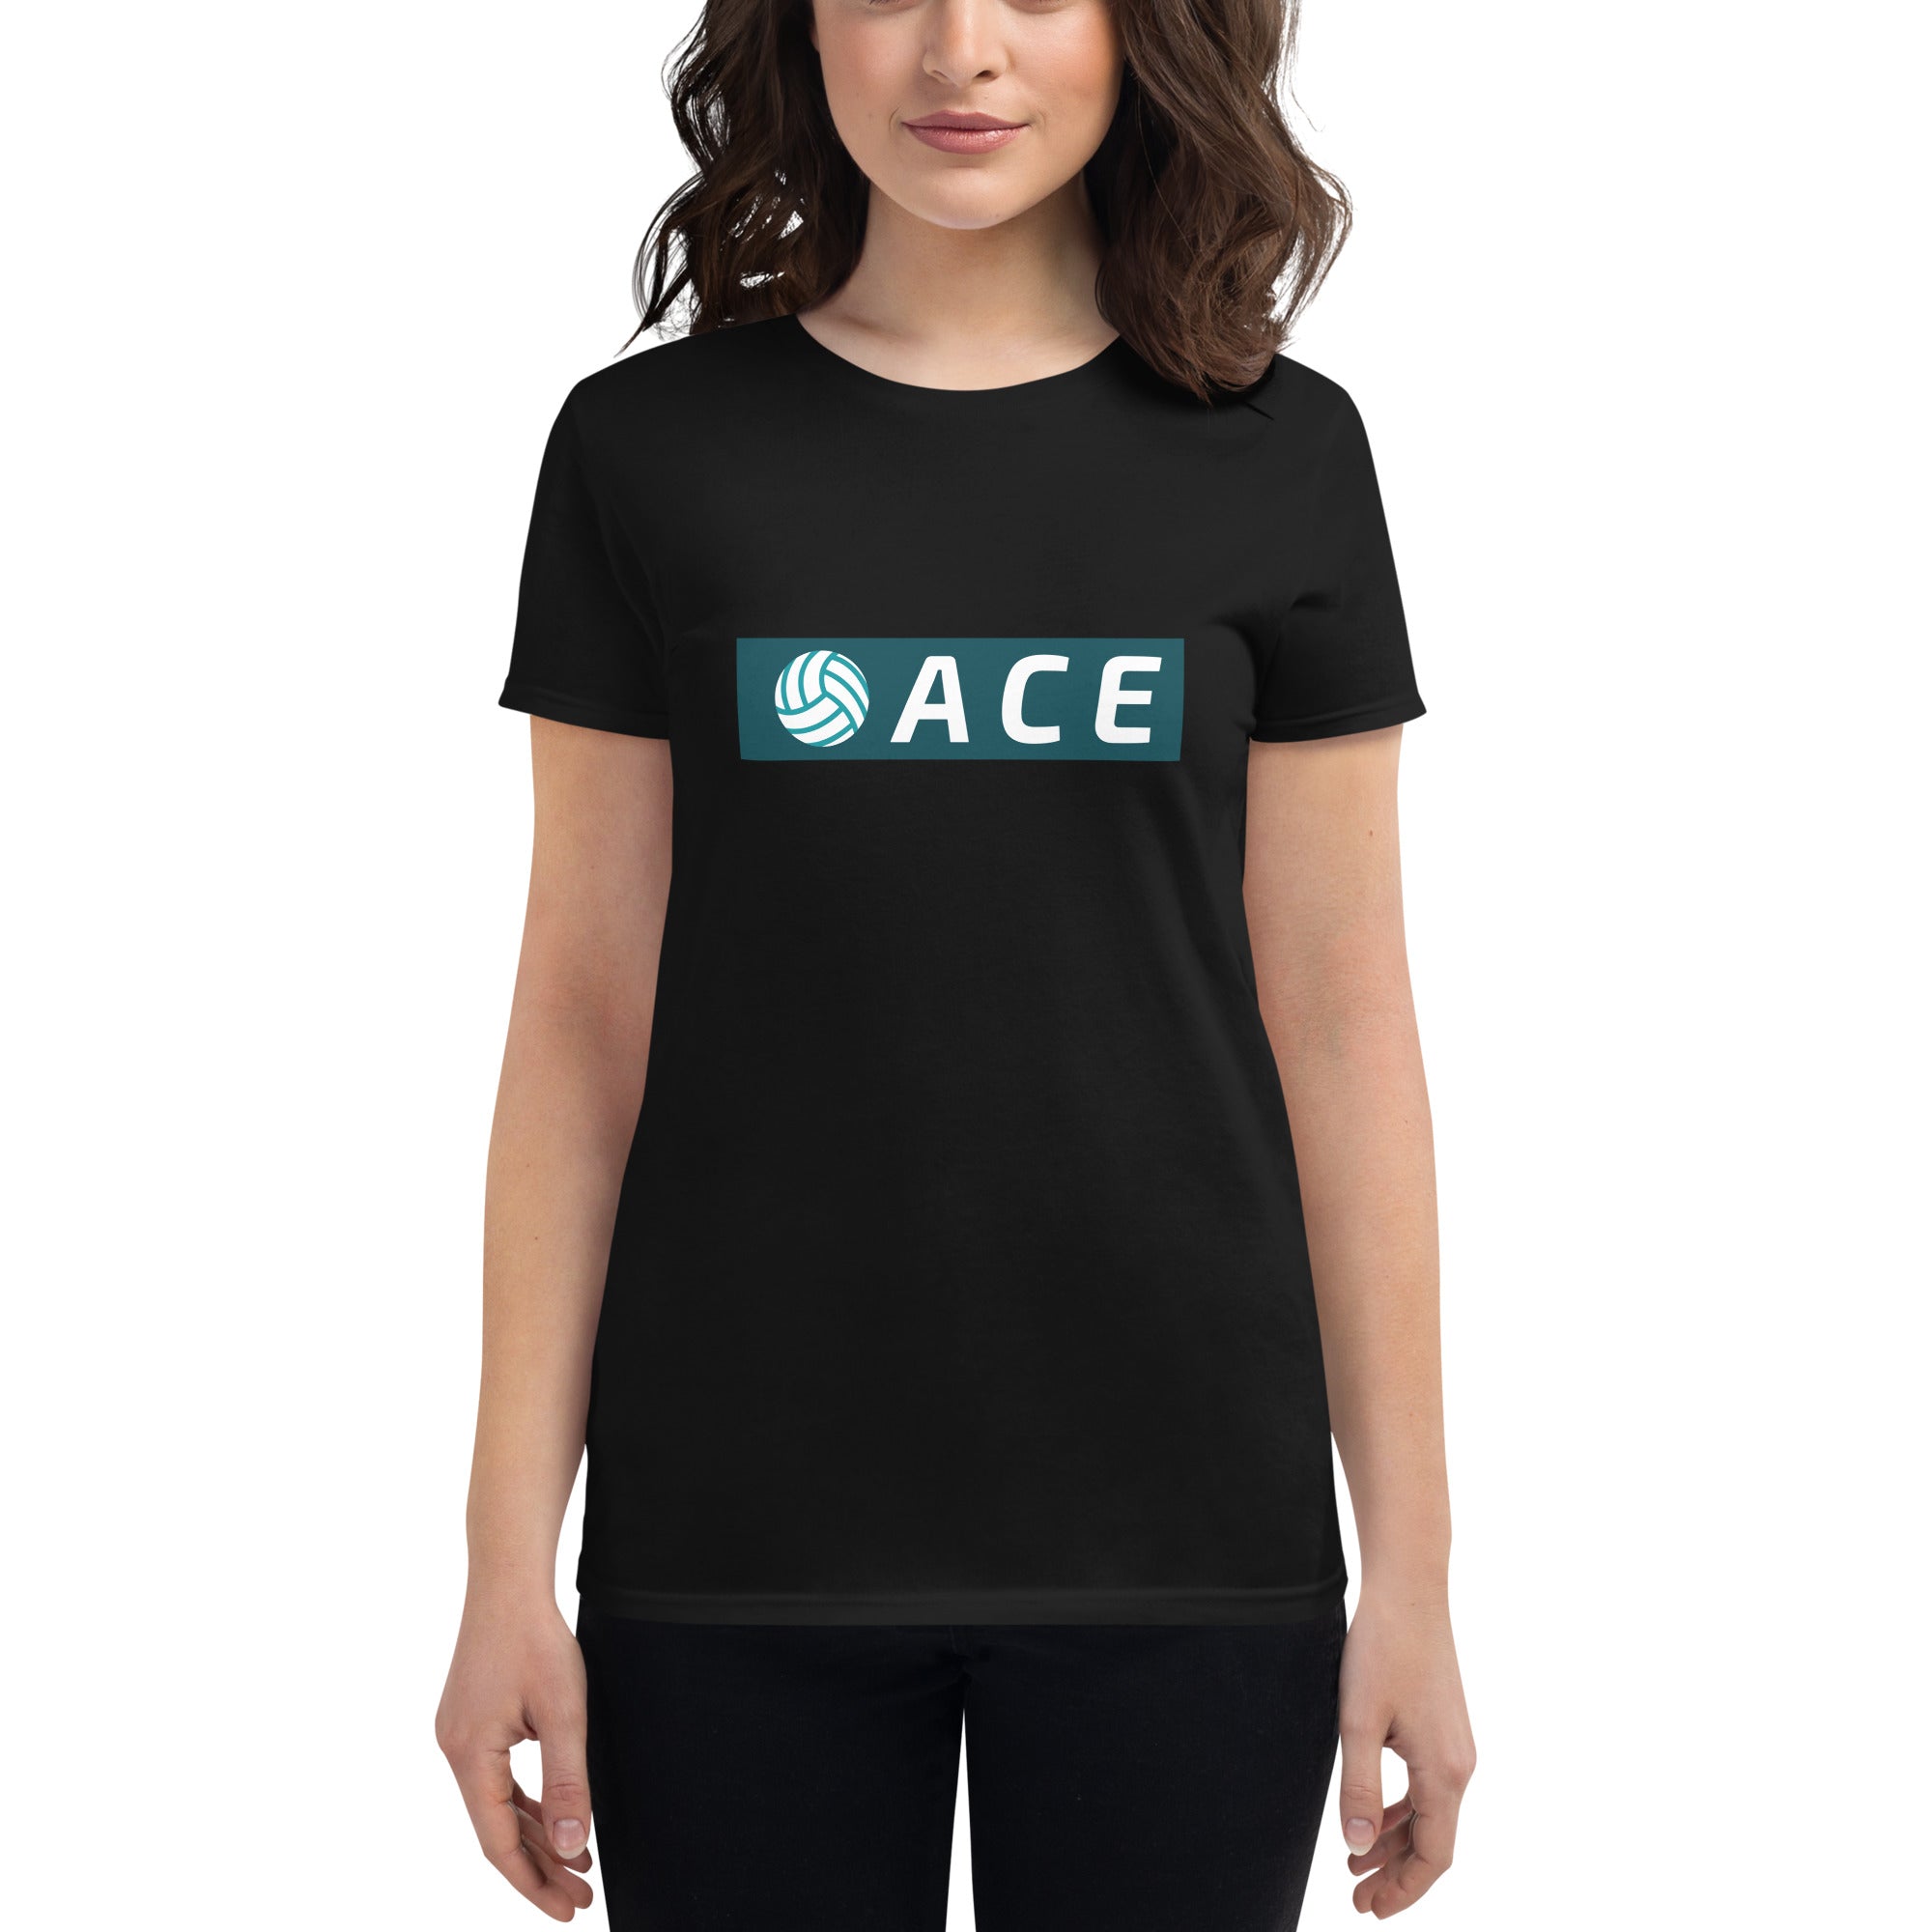 Ace Women's Fitted T-Shirt